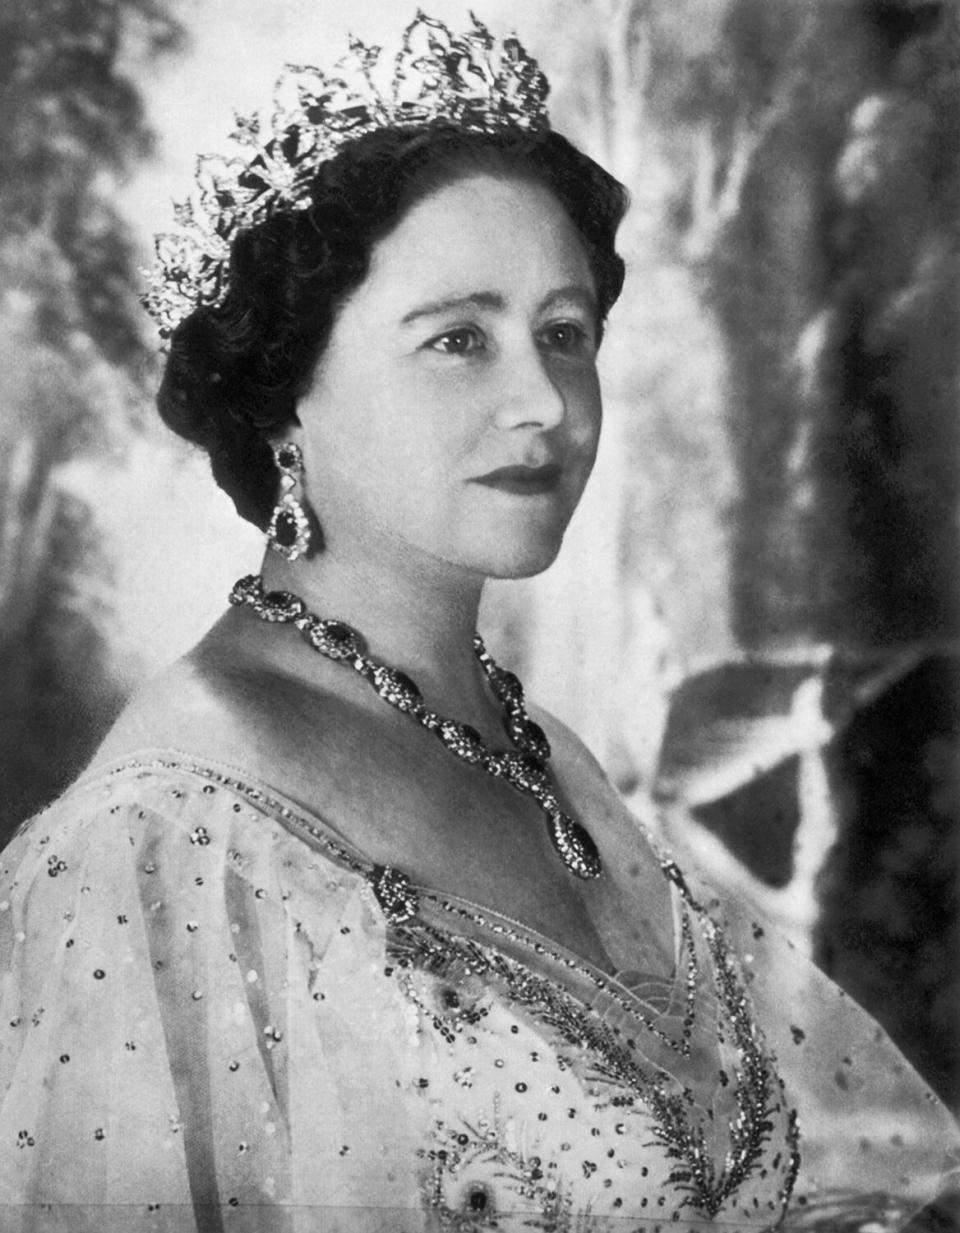 A portrait of Elizabeth Bowes-Lyon, Queen Elizabeth the Queen Mother on her 50th birthday, London, England, 1950.